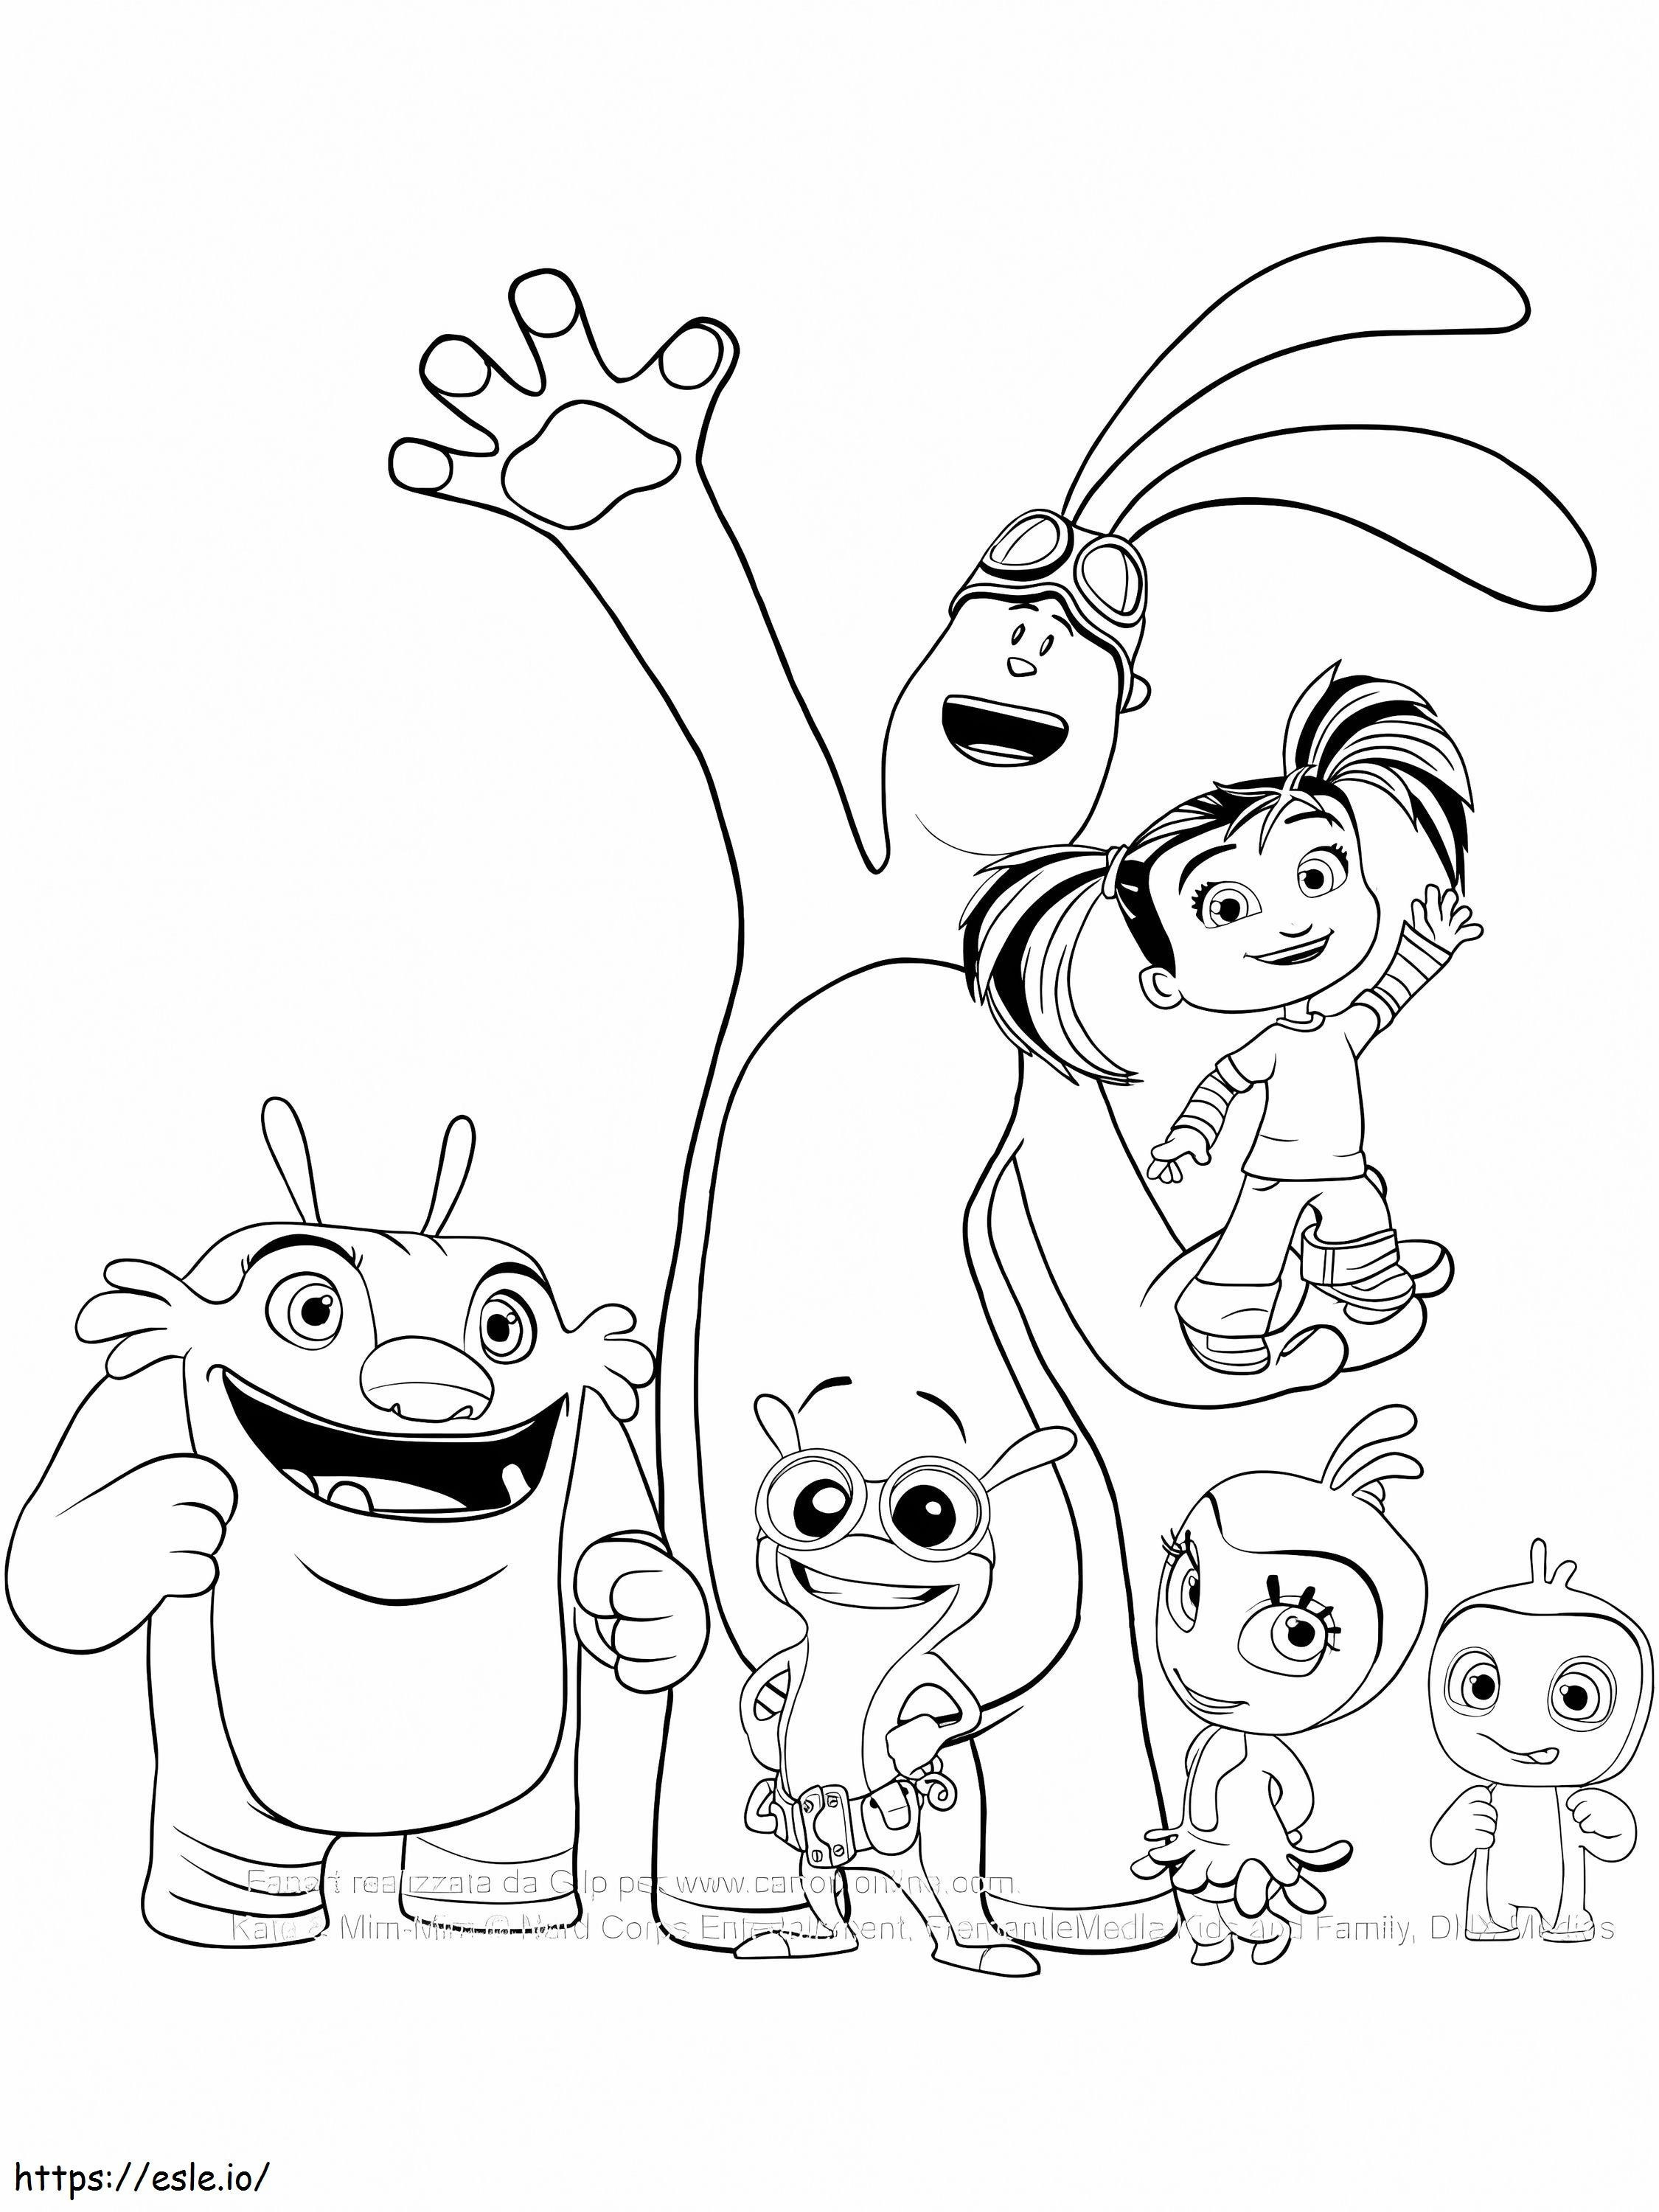 Friendly Kate And Mim Mim coloring page